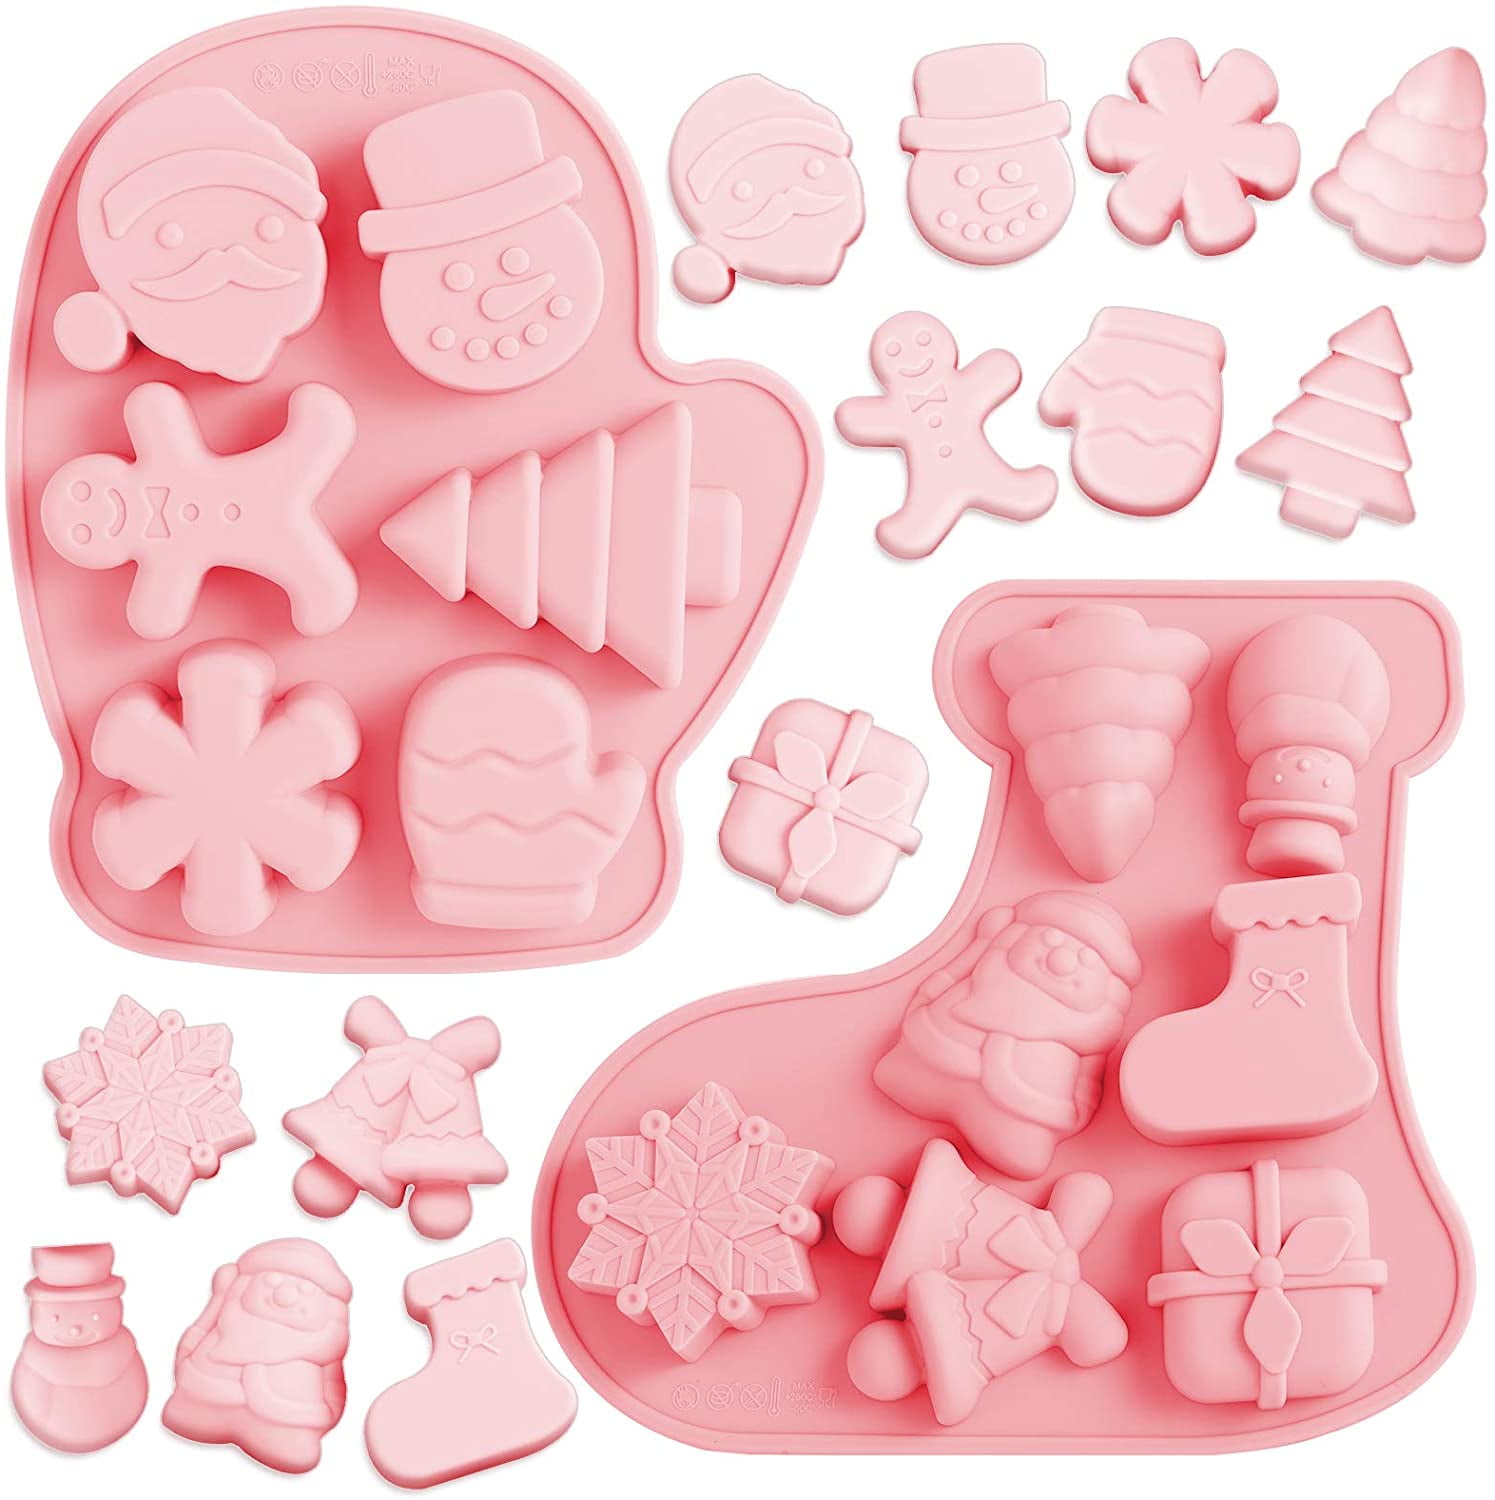 Santa Claus 3D Silicone Baking Cake Jelly Mould Christmas Xmas Sponge Cooking Shaping Chocolate Fondant Moulding Shaping Bake Tool Non Stick 16 x 10 x 4cm Dishwasher Safe Easy Clean